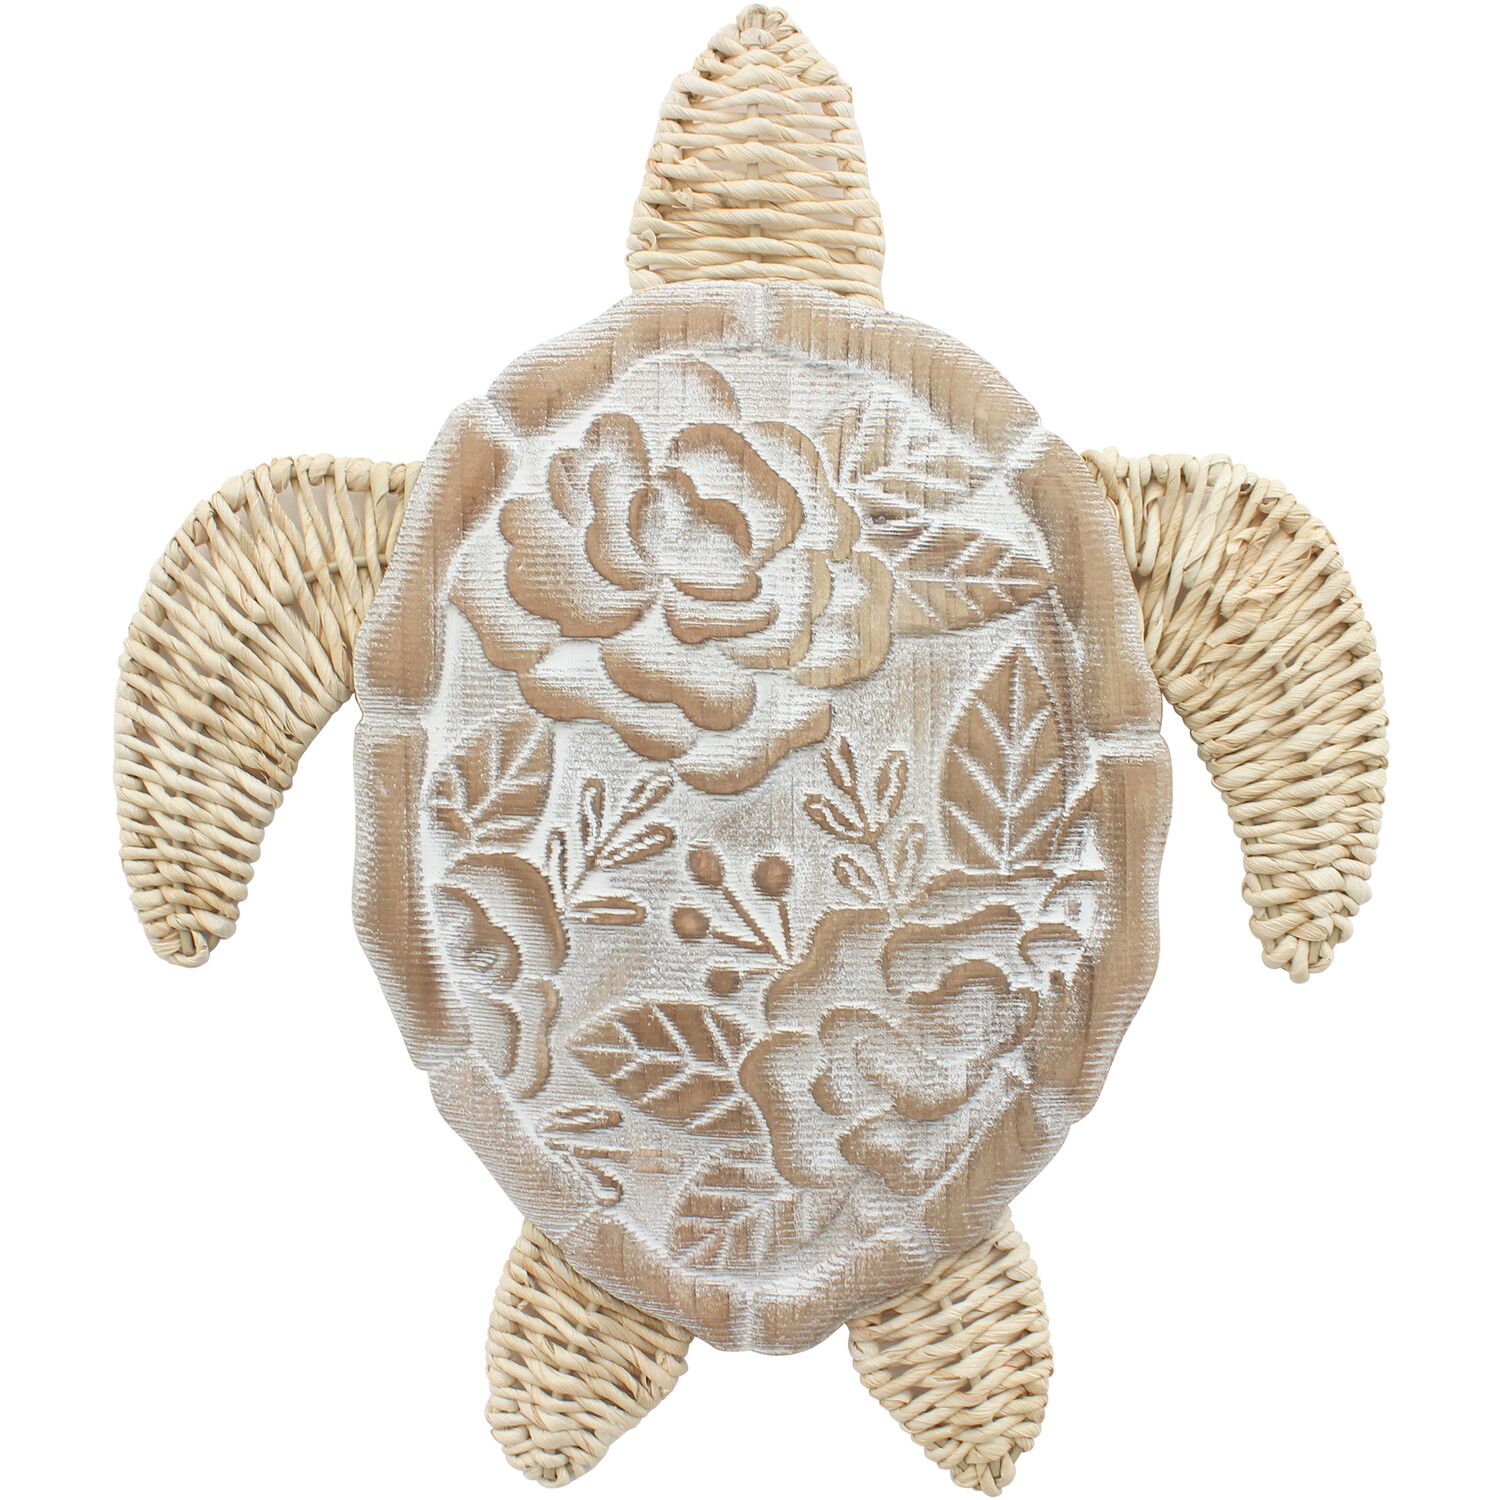 Tilly the Turtle Carved Wooden Art - Natural Image 1